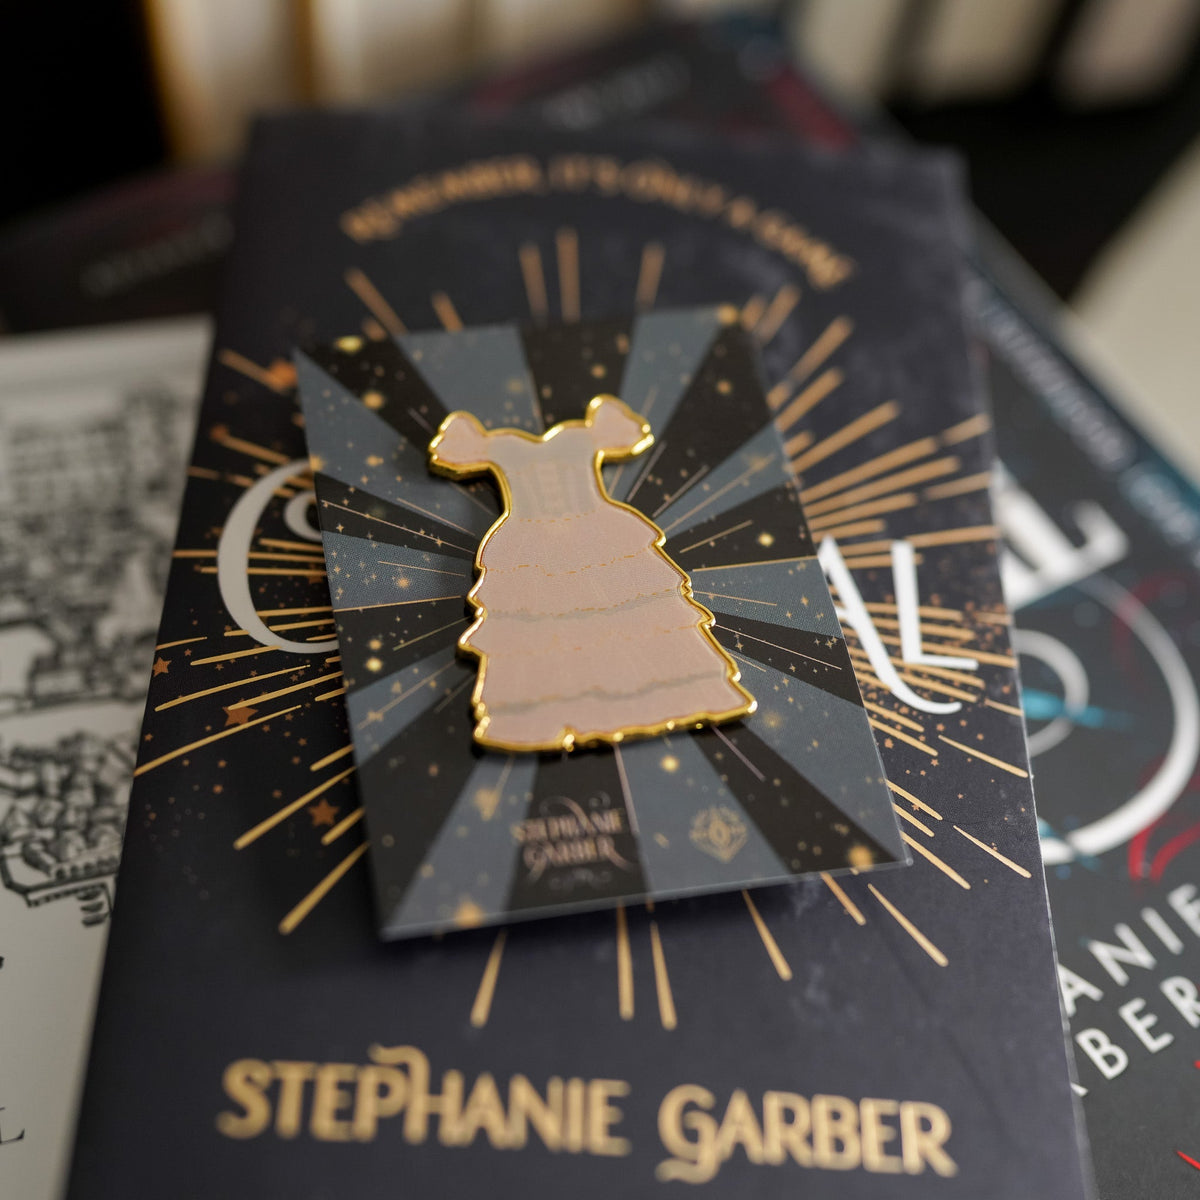 Caraval Lenticular Dress Pin has a gold edge and changes from white to a deep red dress with ruffles and black detailing.